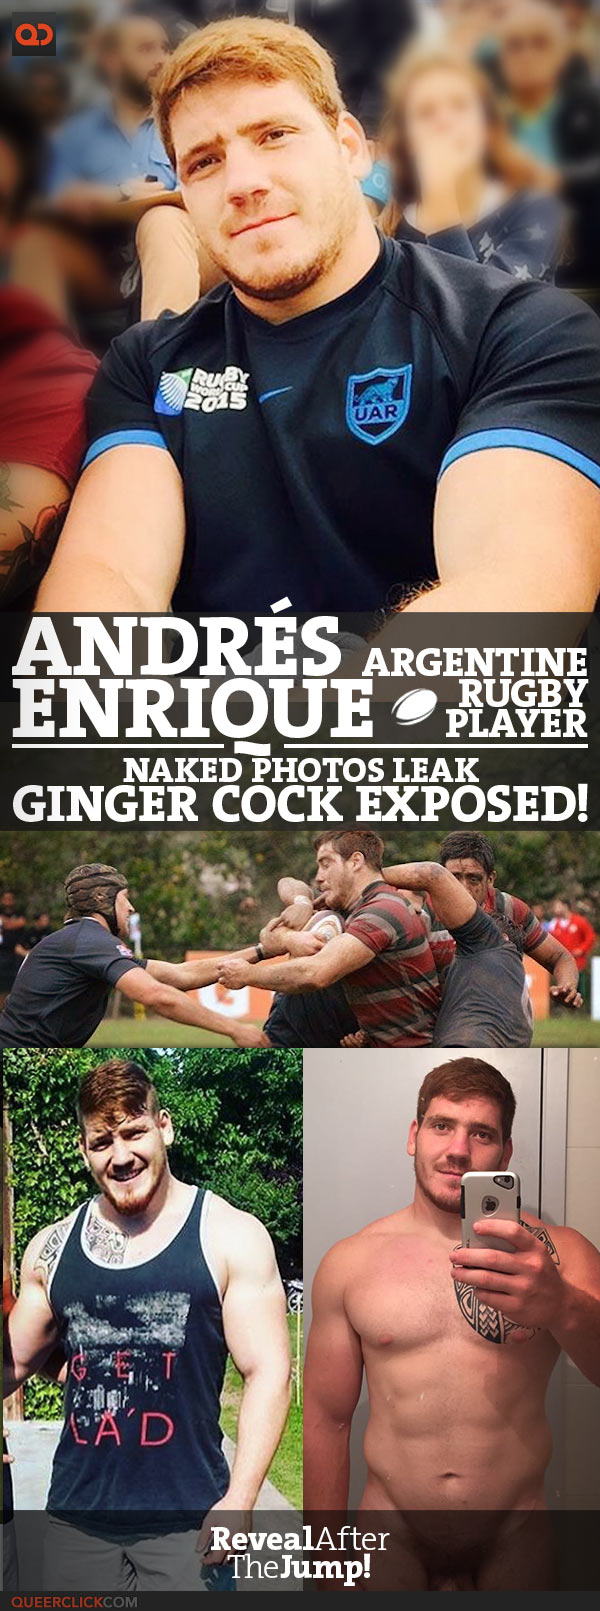 Andrés Enrique, Argentine Rugby Player, Naked Photos Leak - Ginger Cock Exposed!